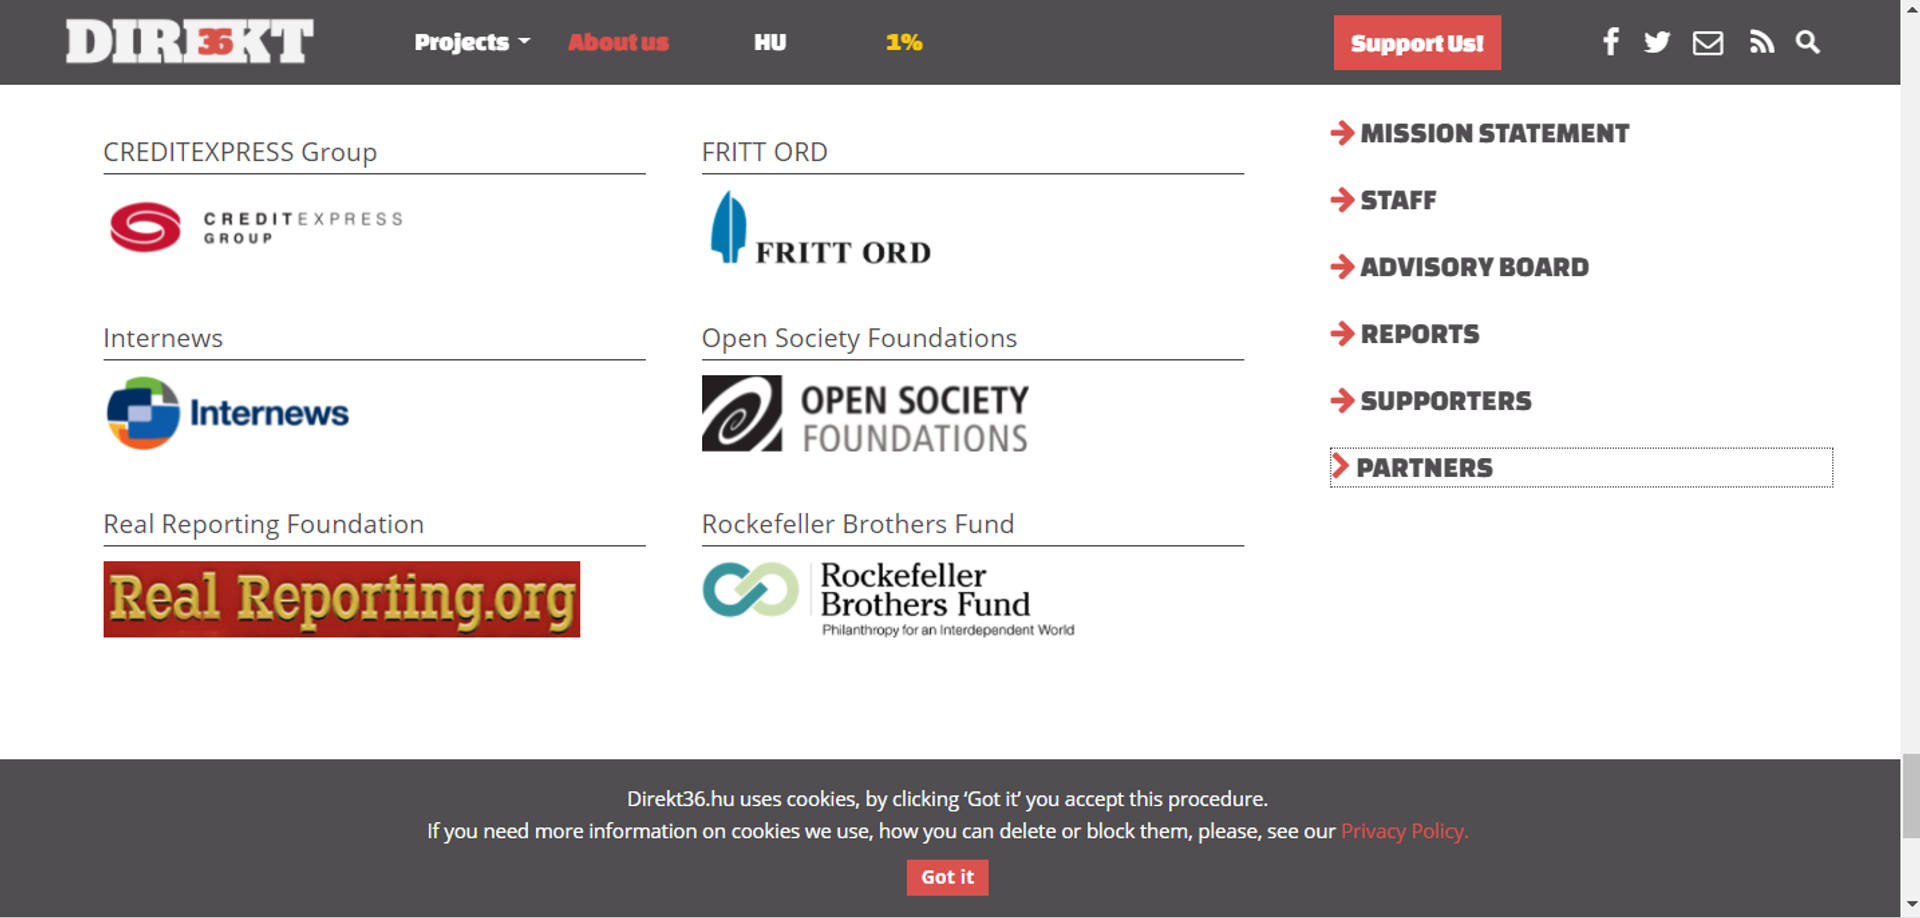 Screengrab of Direkt36.hu's 'Partners' page, listing Open Society Foundations and others among its partners. - Sputnik International, 1920, 07.09.2021